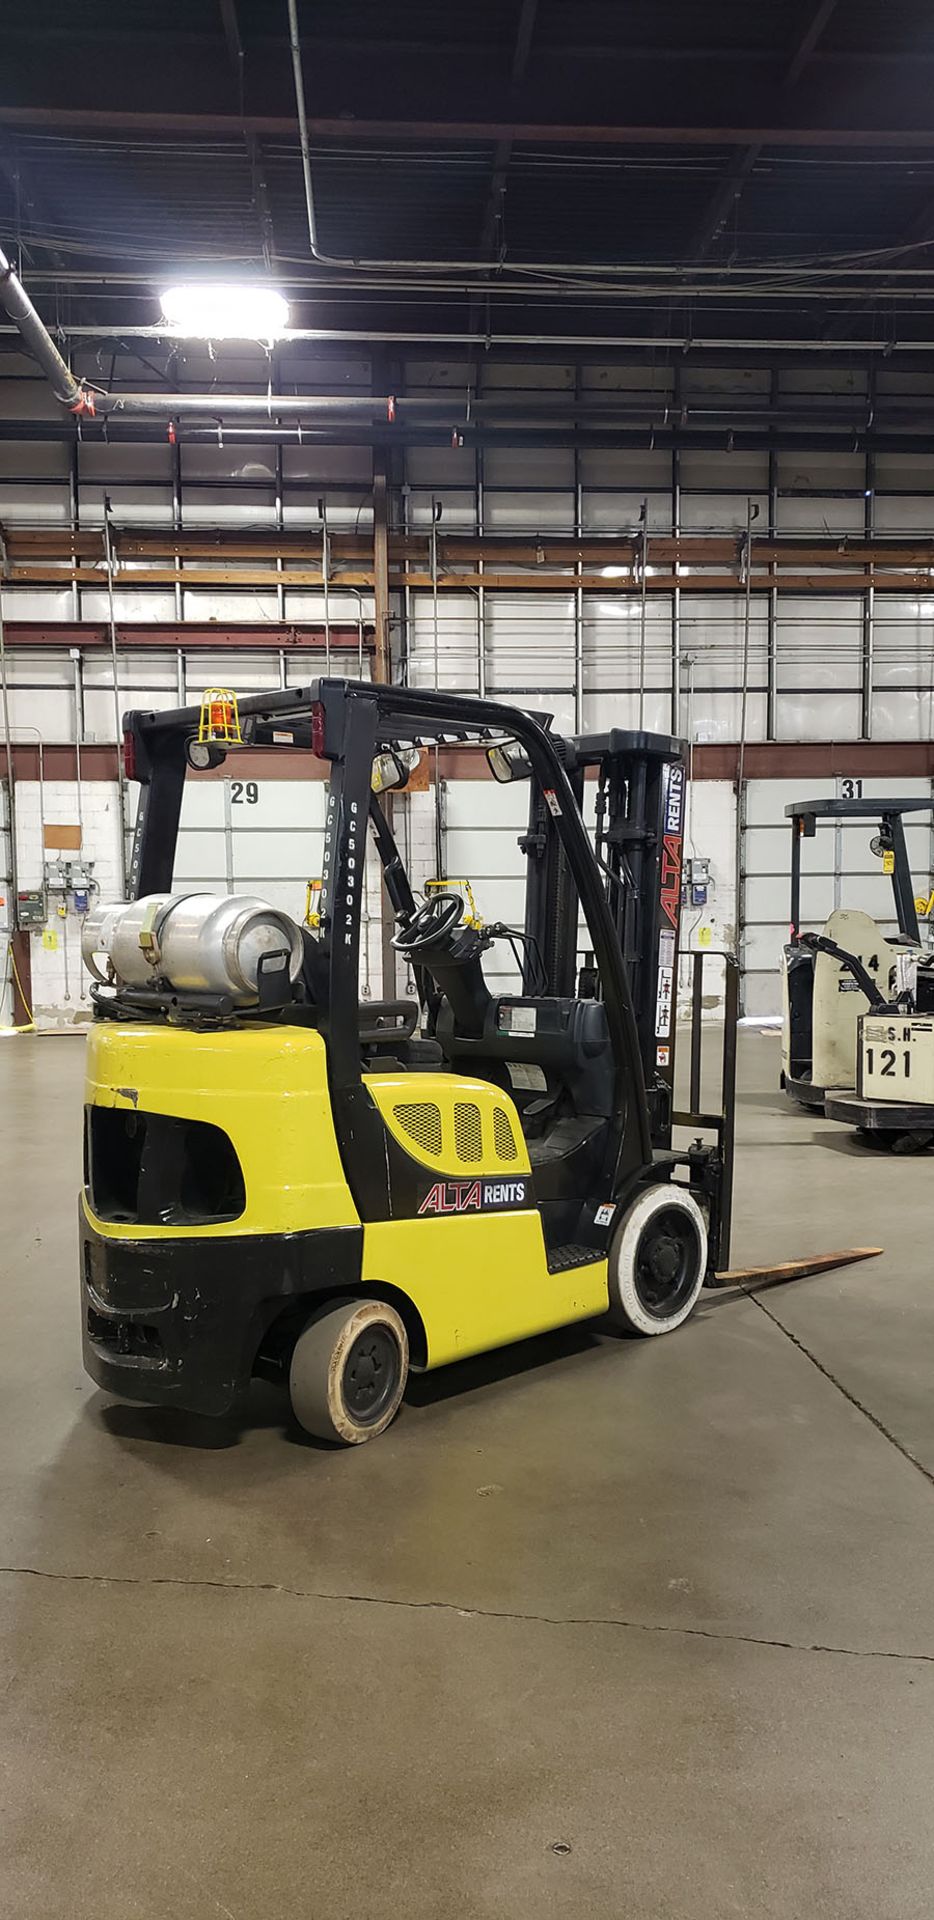 2012 HYSTER 5,000 LB. CAPACITY LPG FORKLIFT; MODEL S50FT, 3-STAGE MAST, SIDESHIFT, 194.9 MAX LIFT - Image 2 of 3